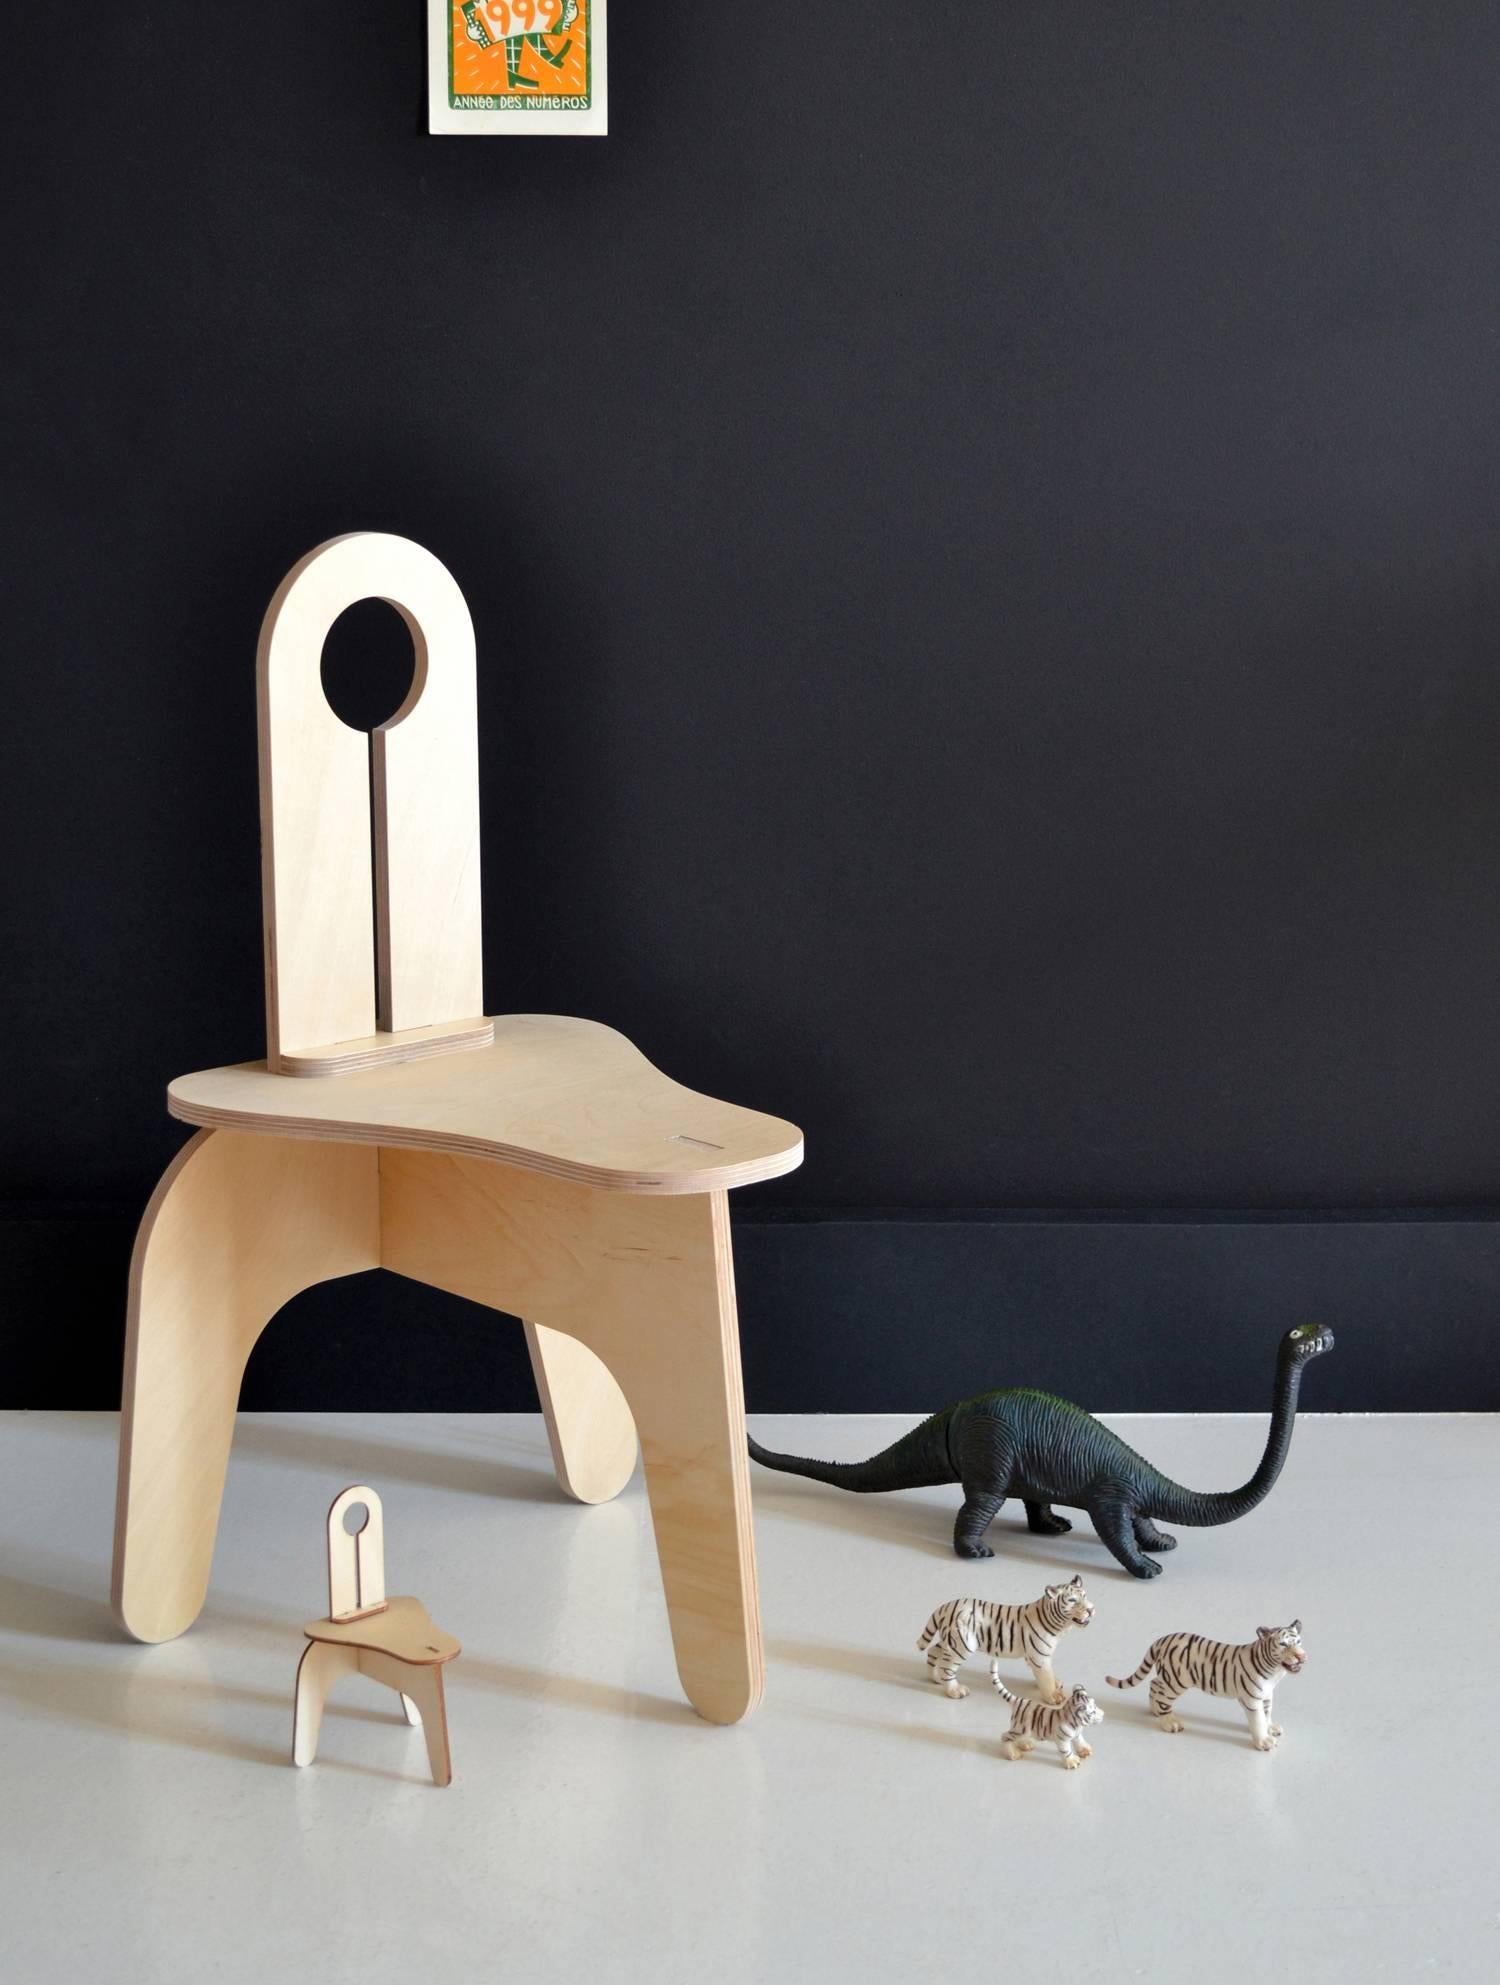 Western child chair by makémaké, Contemporary, France, 2017

Designed by makémaké
France, 2017
Finnish Birch Plywood, Hard-Coat Organic Oil Finish
flat-pack, self-assembly
Measures: H 21 in, W 14.25 in, D 15.75 in, seat H 12.5 in

Also